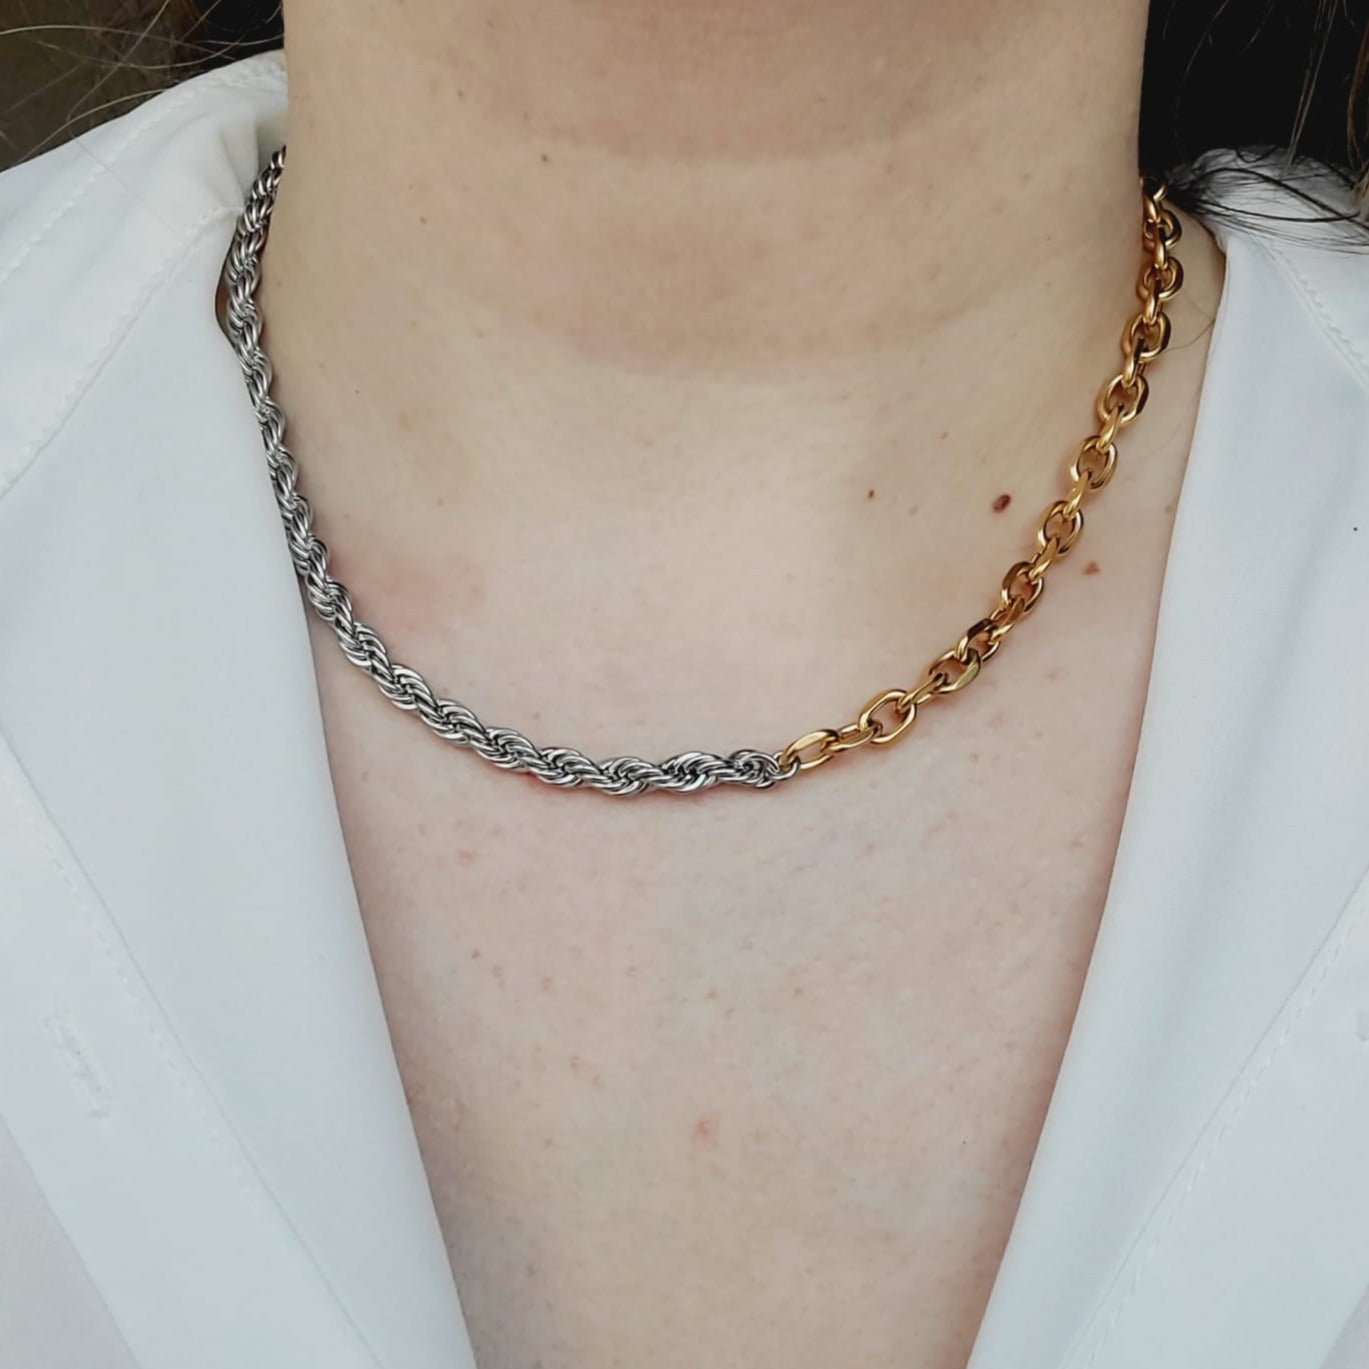 Minimalist chain, double tone Chain, rope Necklace, rolo Chain, Water resistant jewelry, water resistant Necklace, Water resistant bracelet, vintage jewelry, vintage jewelry, vintage necklace, 14k gold necklace, 14k gold jewelry, 14k gold necklace, fine jewelry, fine necklace, fine bracelet, snake gold necklace, bold necklace, bold jewelry, handmade jewelry, fine jewelry brand, hello luxy, joyeria fina, gold plated chain, 18k gold plated chain, 18k gold plated jewelry, gift for her